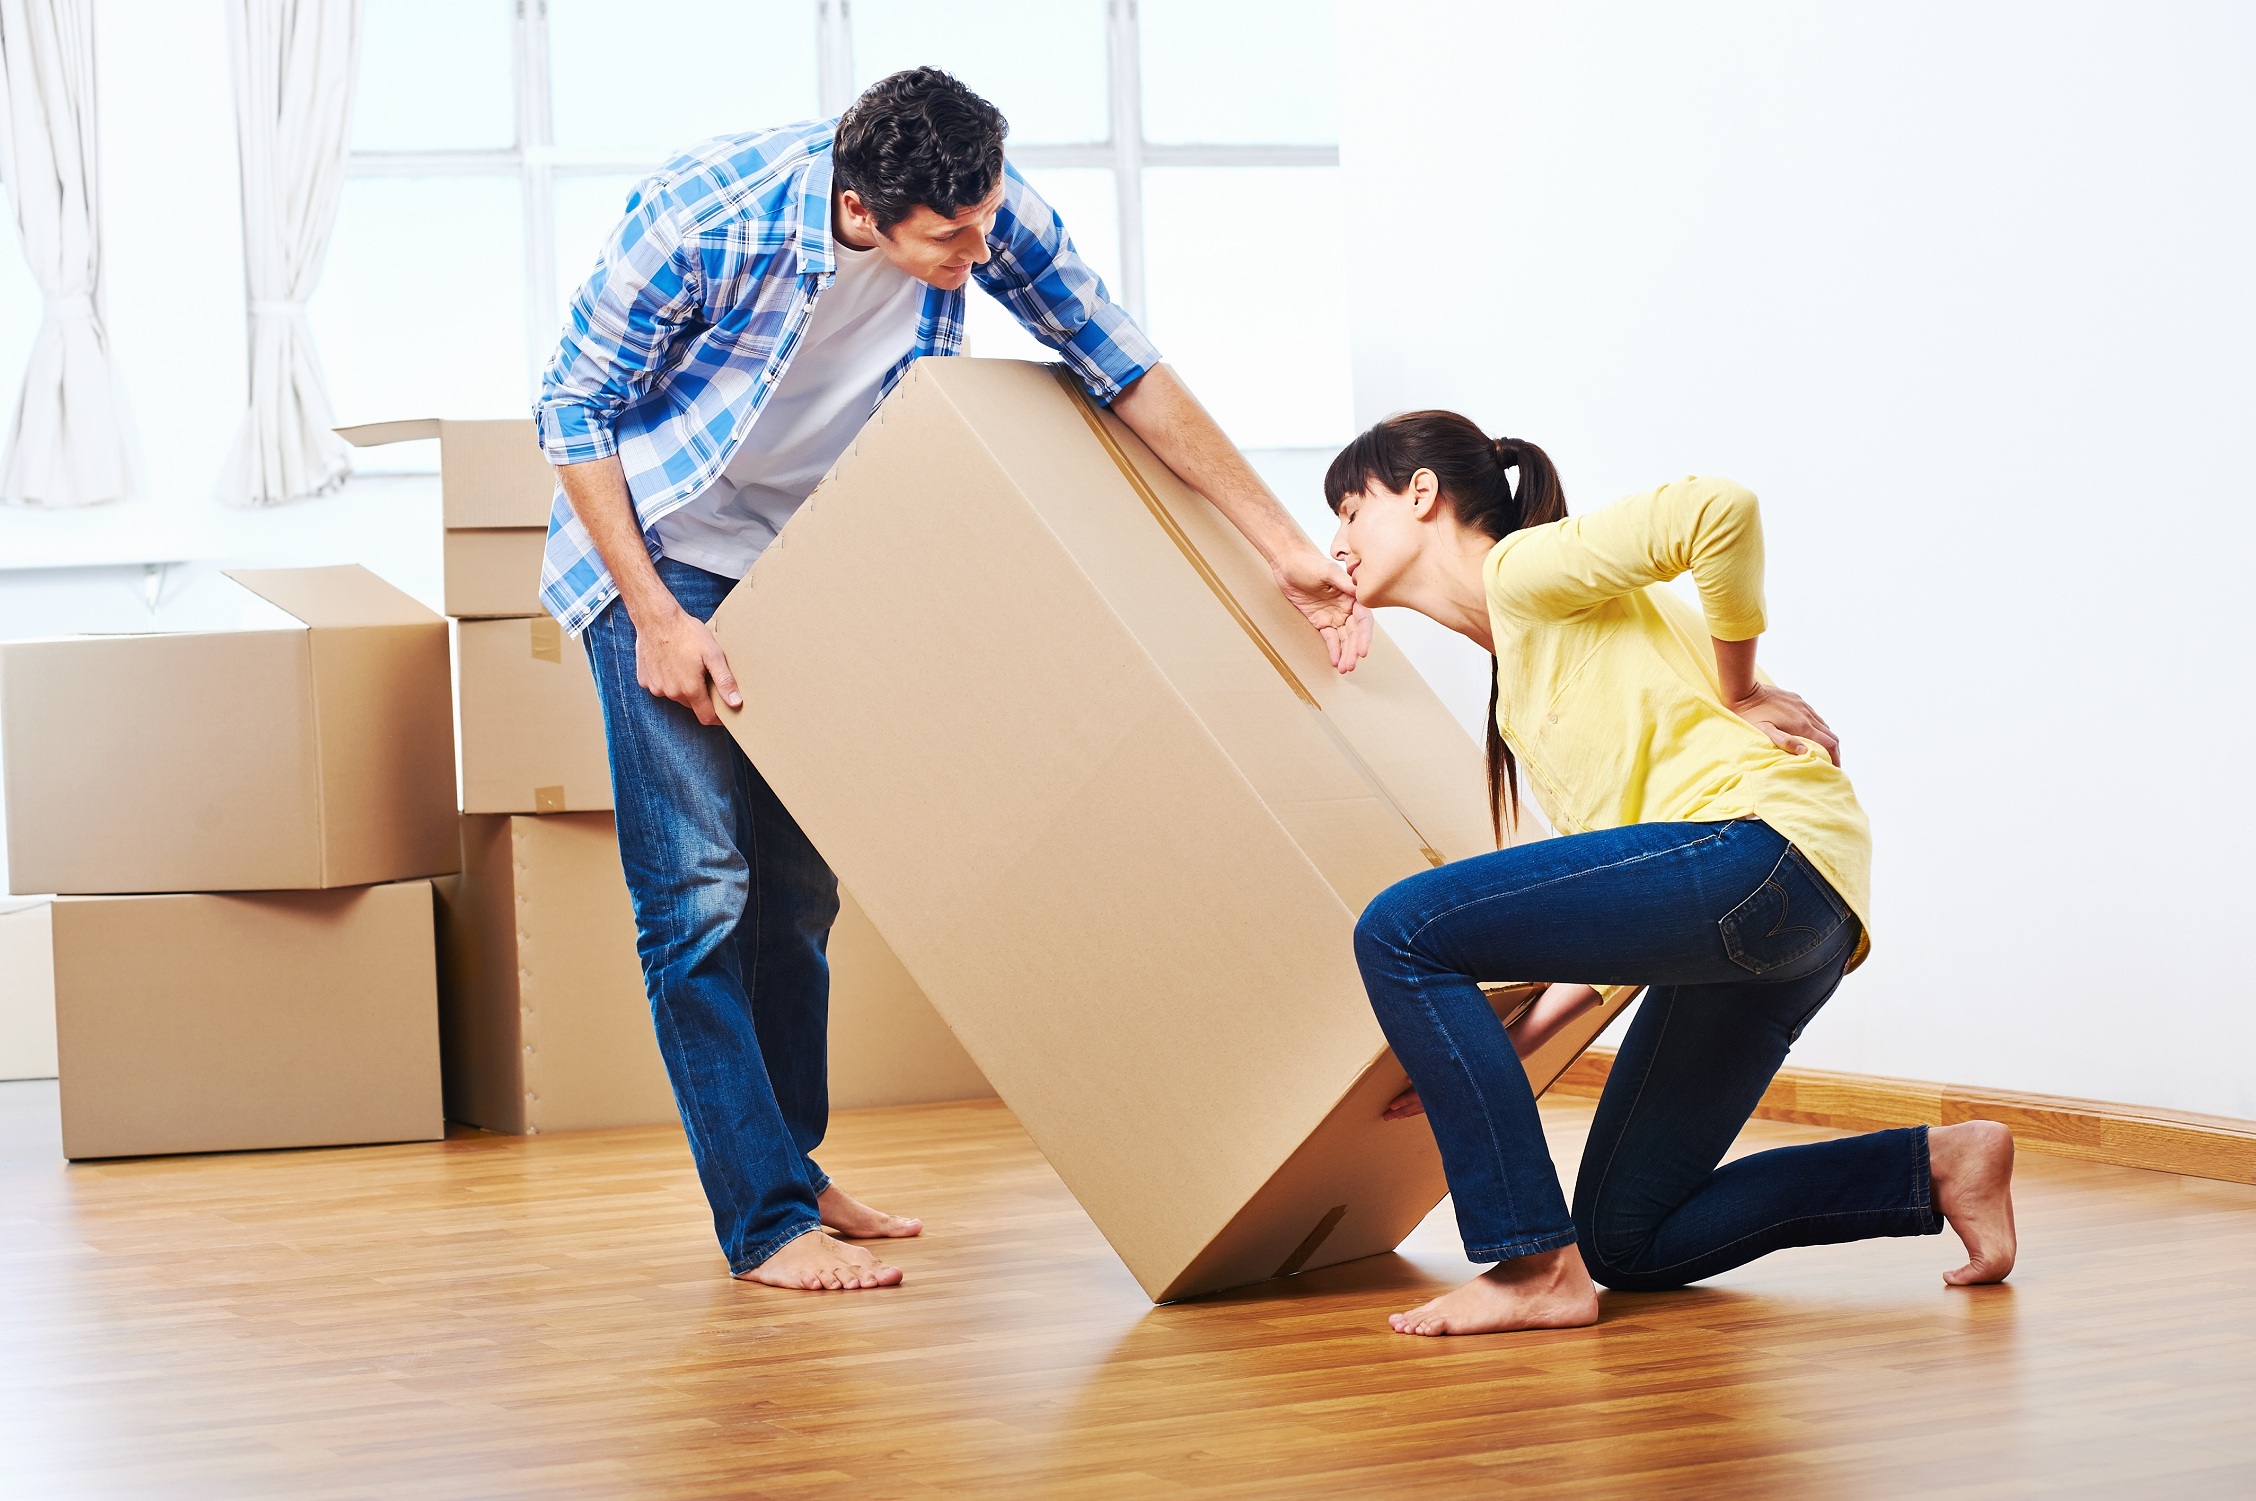 packers and movers in chennai